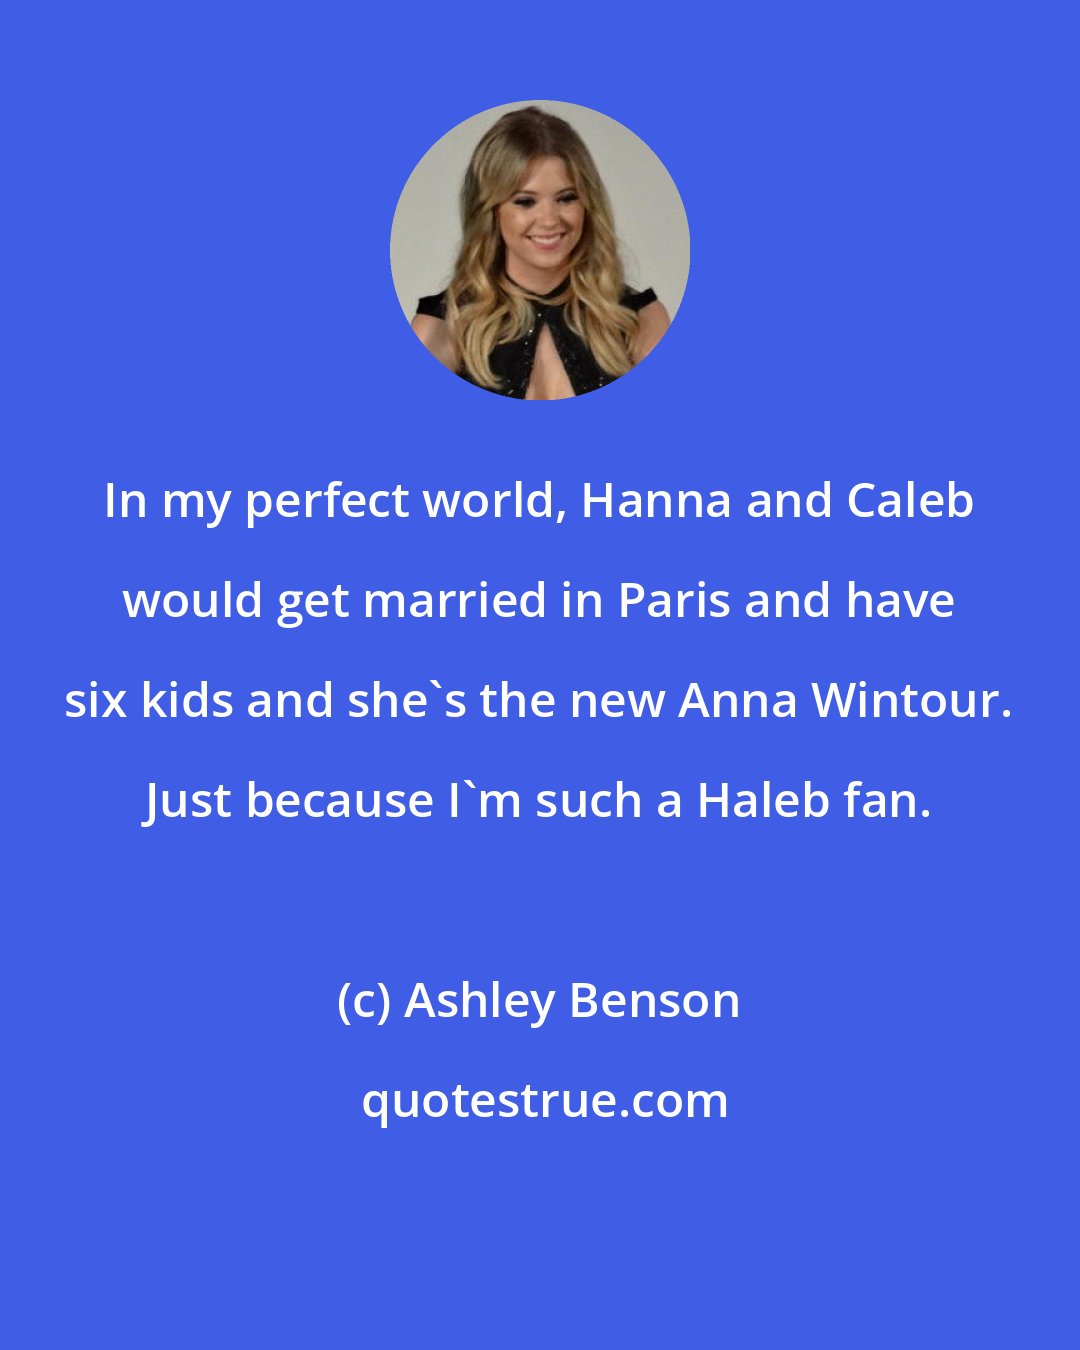 Ashley Benson: In my perfect world, Hanna and Caleb would get married in Paris and have six kids and she's the new Anna Wintour. Just because I'm such a Haleb fan.